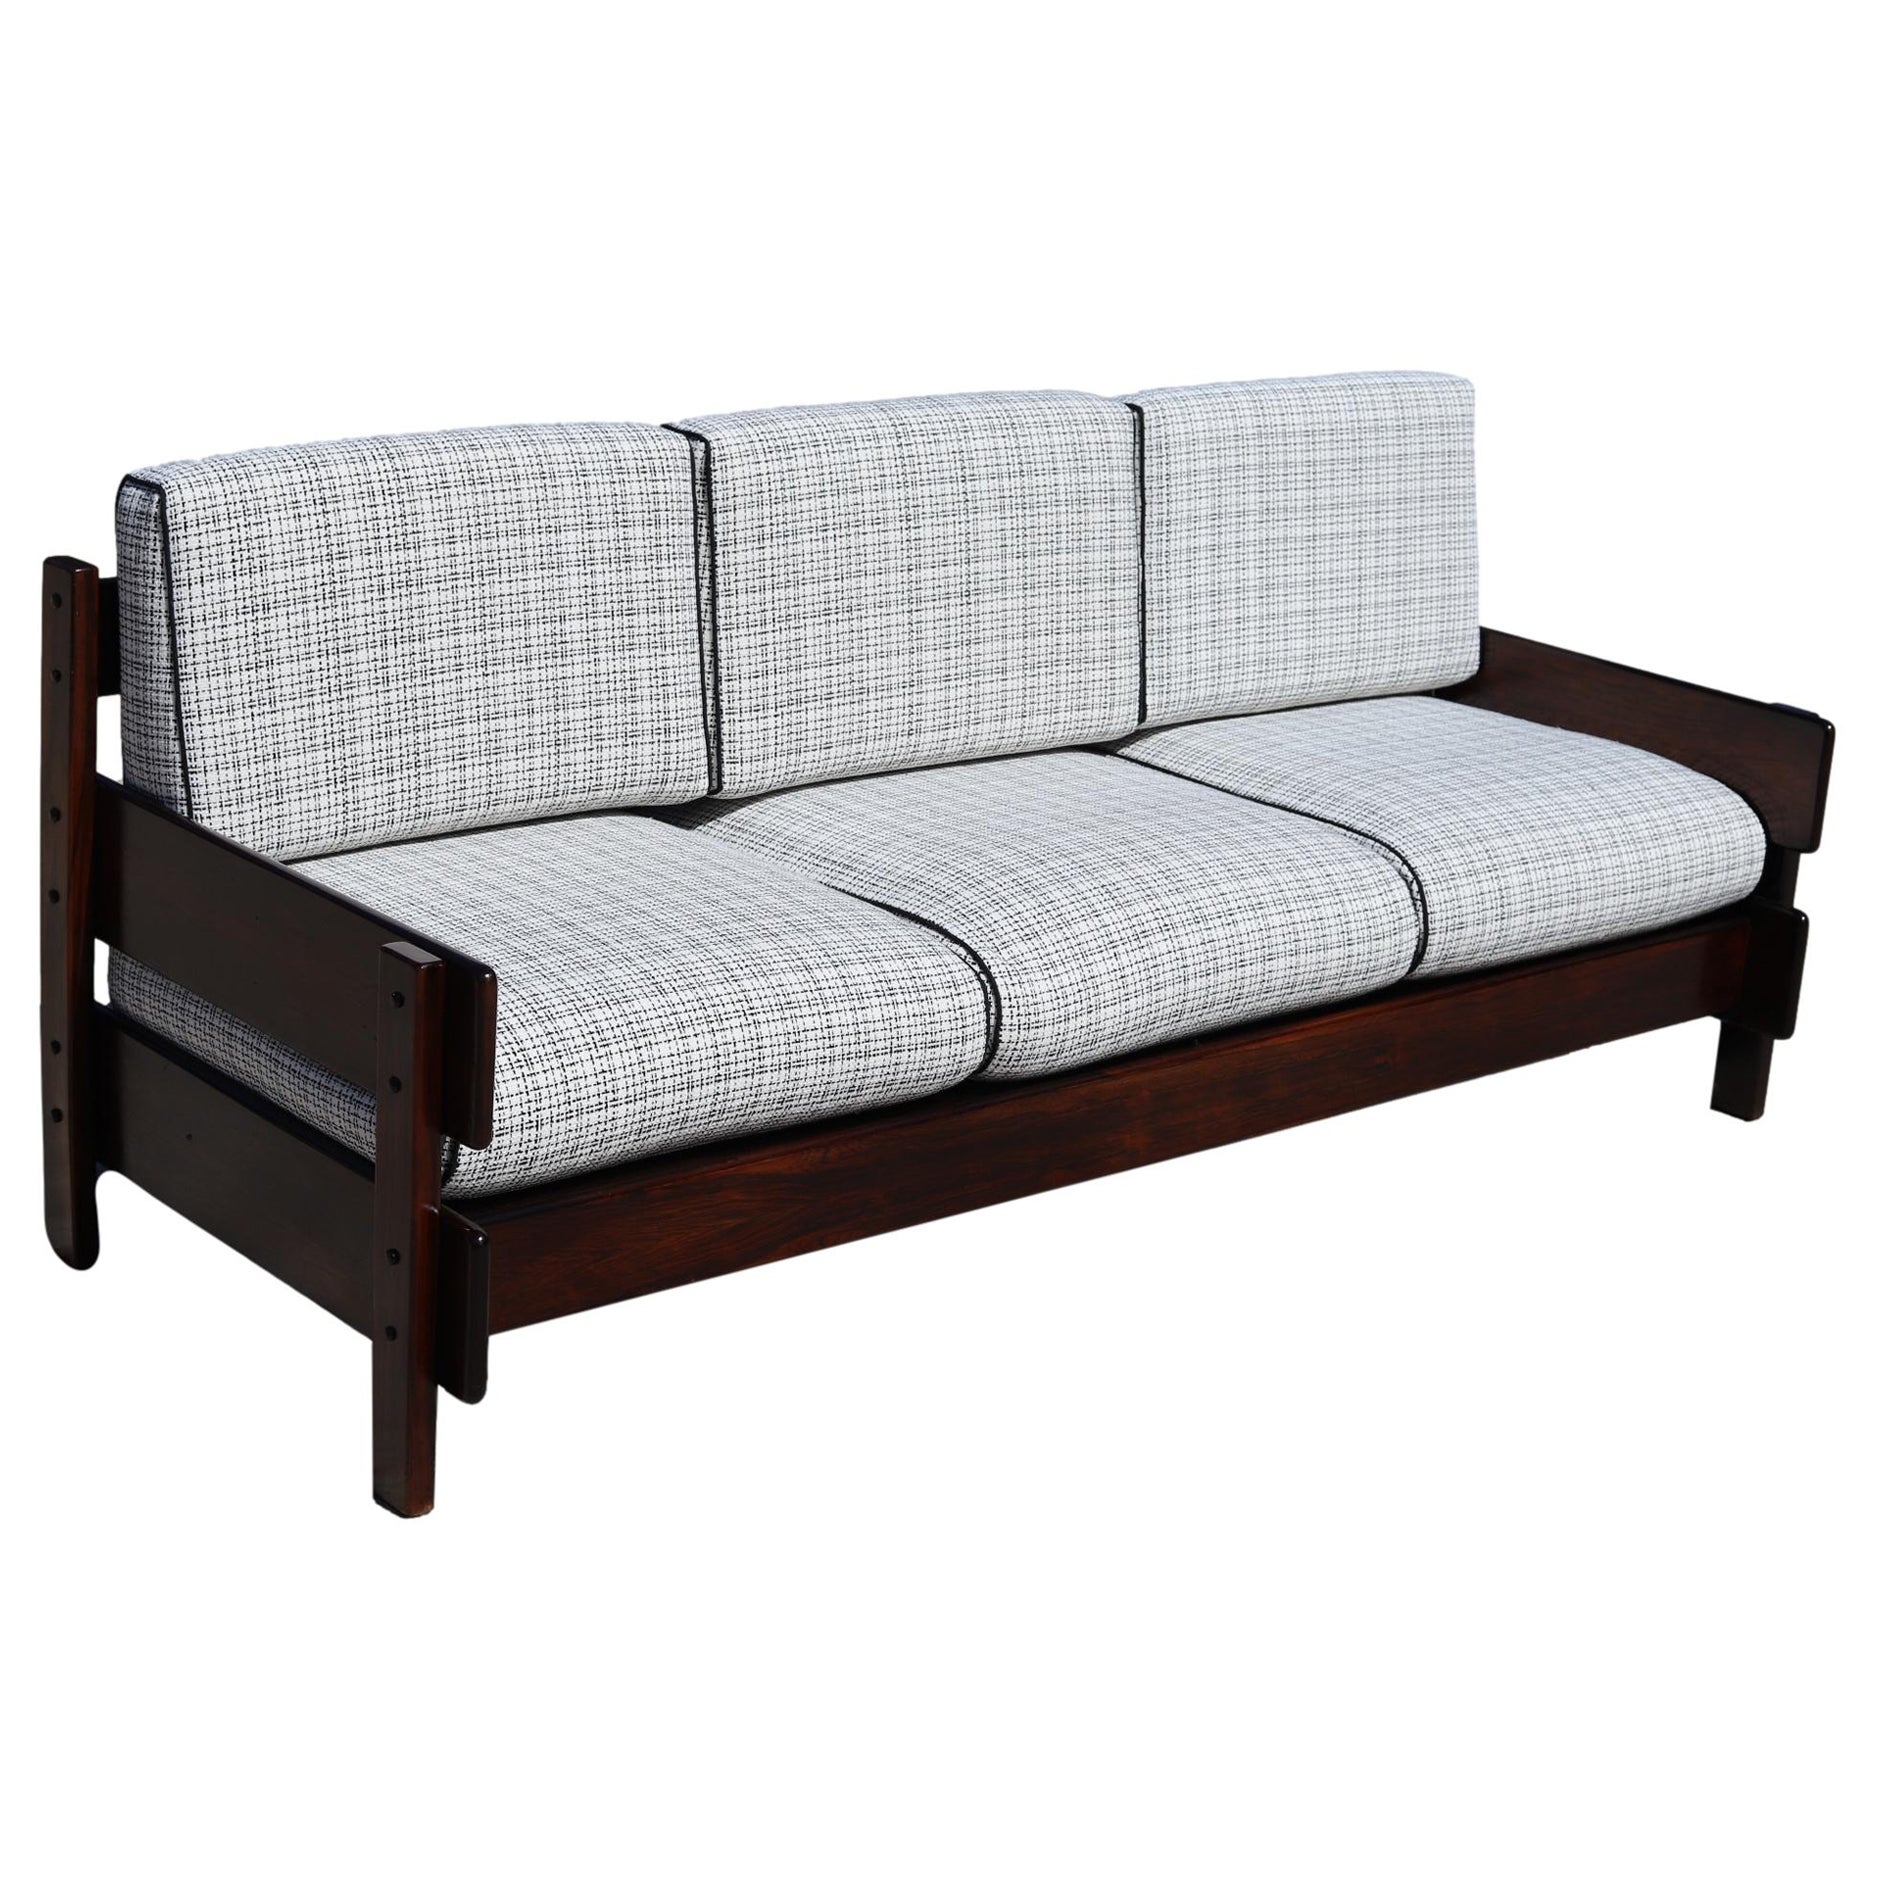 Brazilian Rosewood Sofa in Leather and Linen, Circa 60'